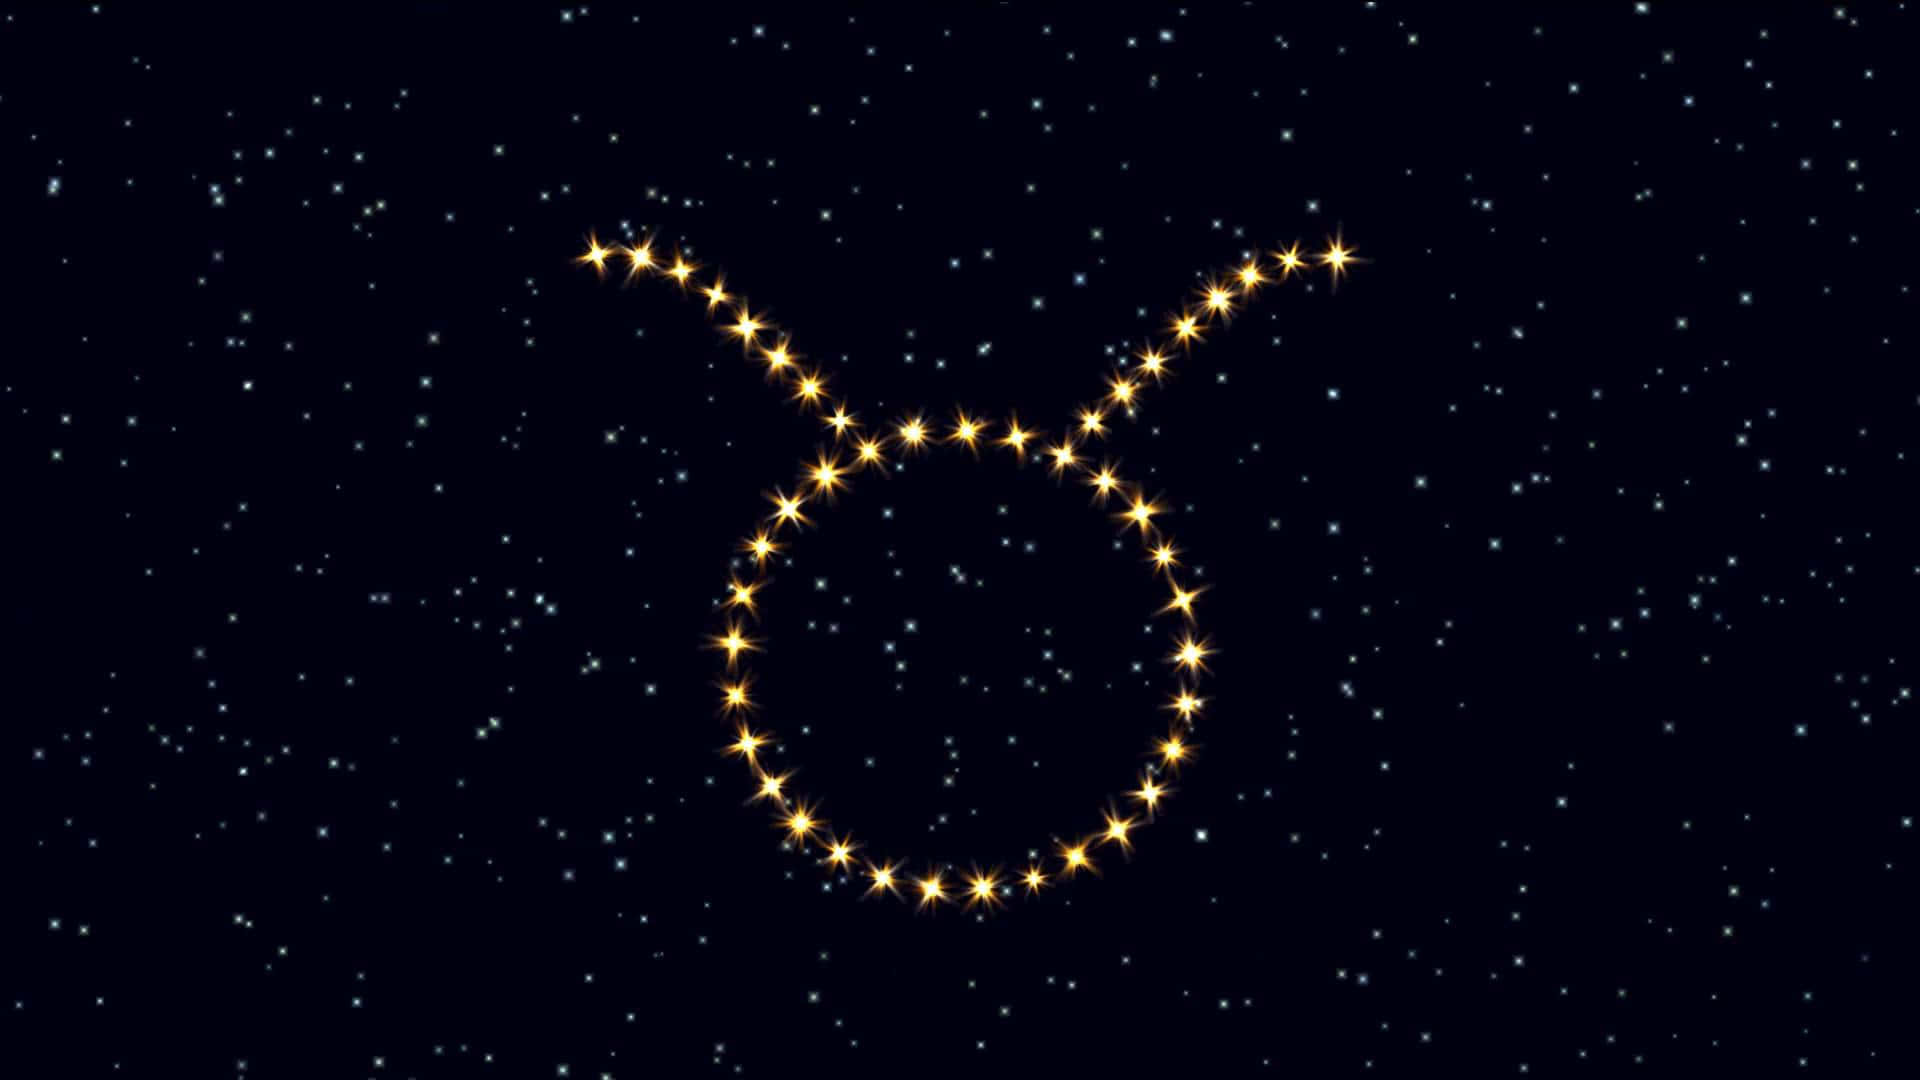 A Star Sign Is Shown In The Night Sky